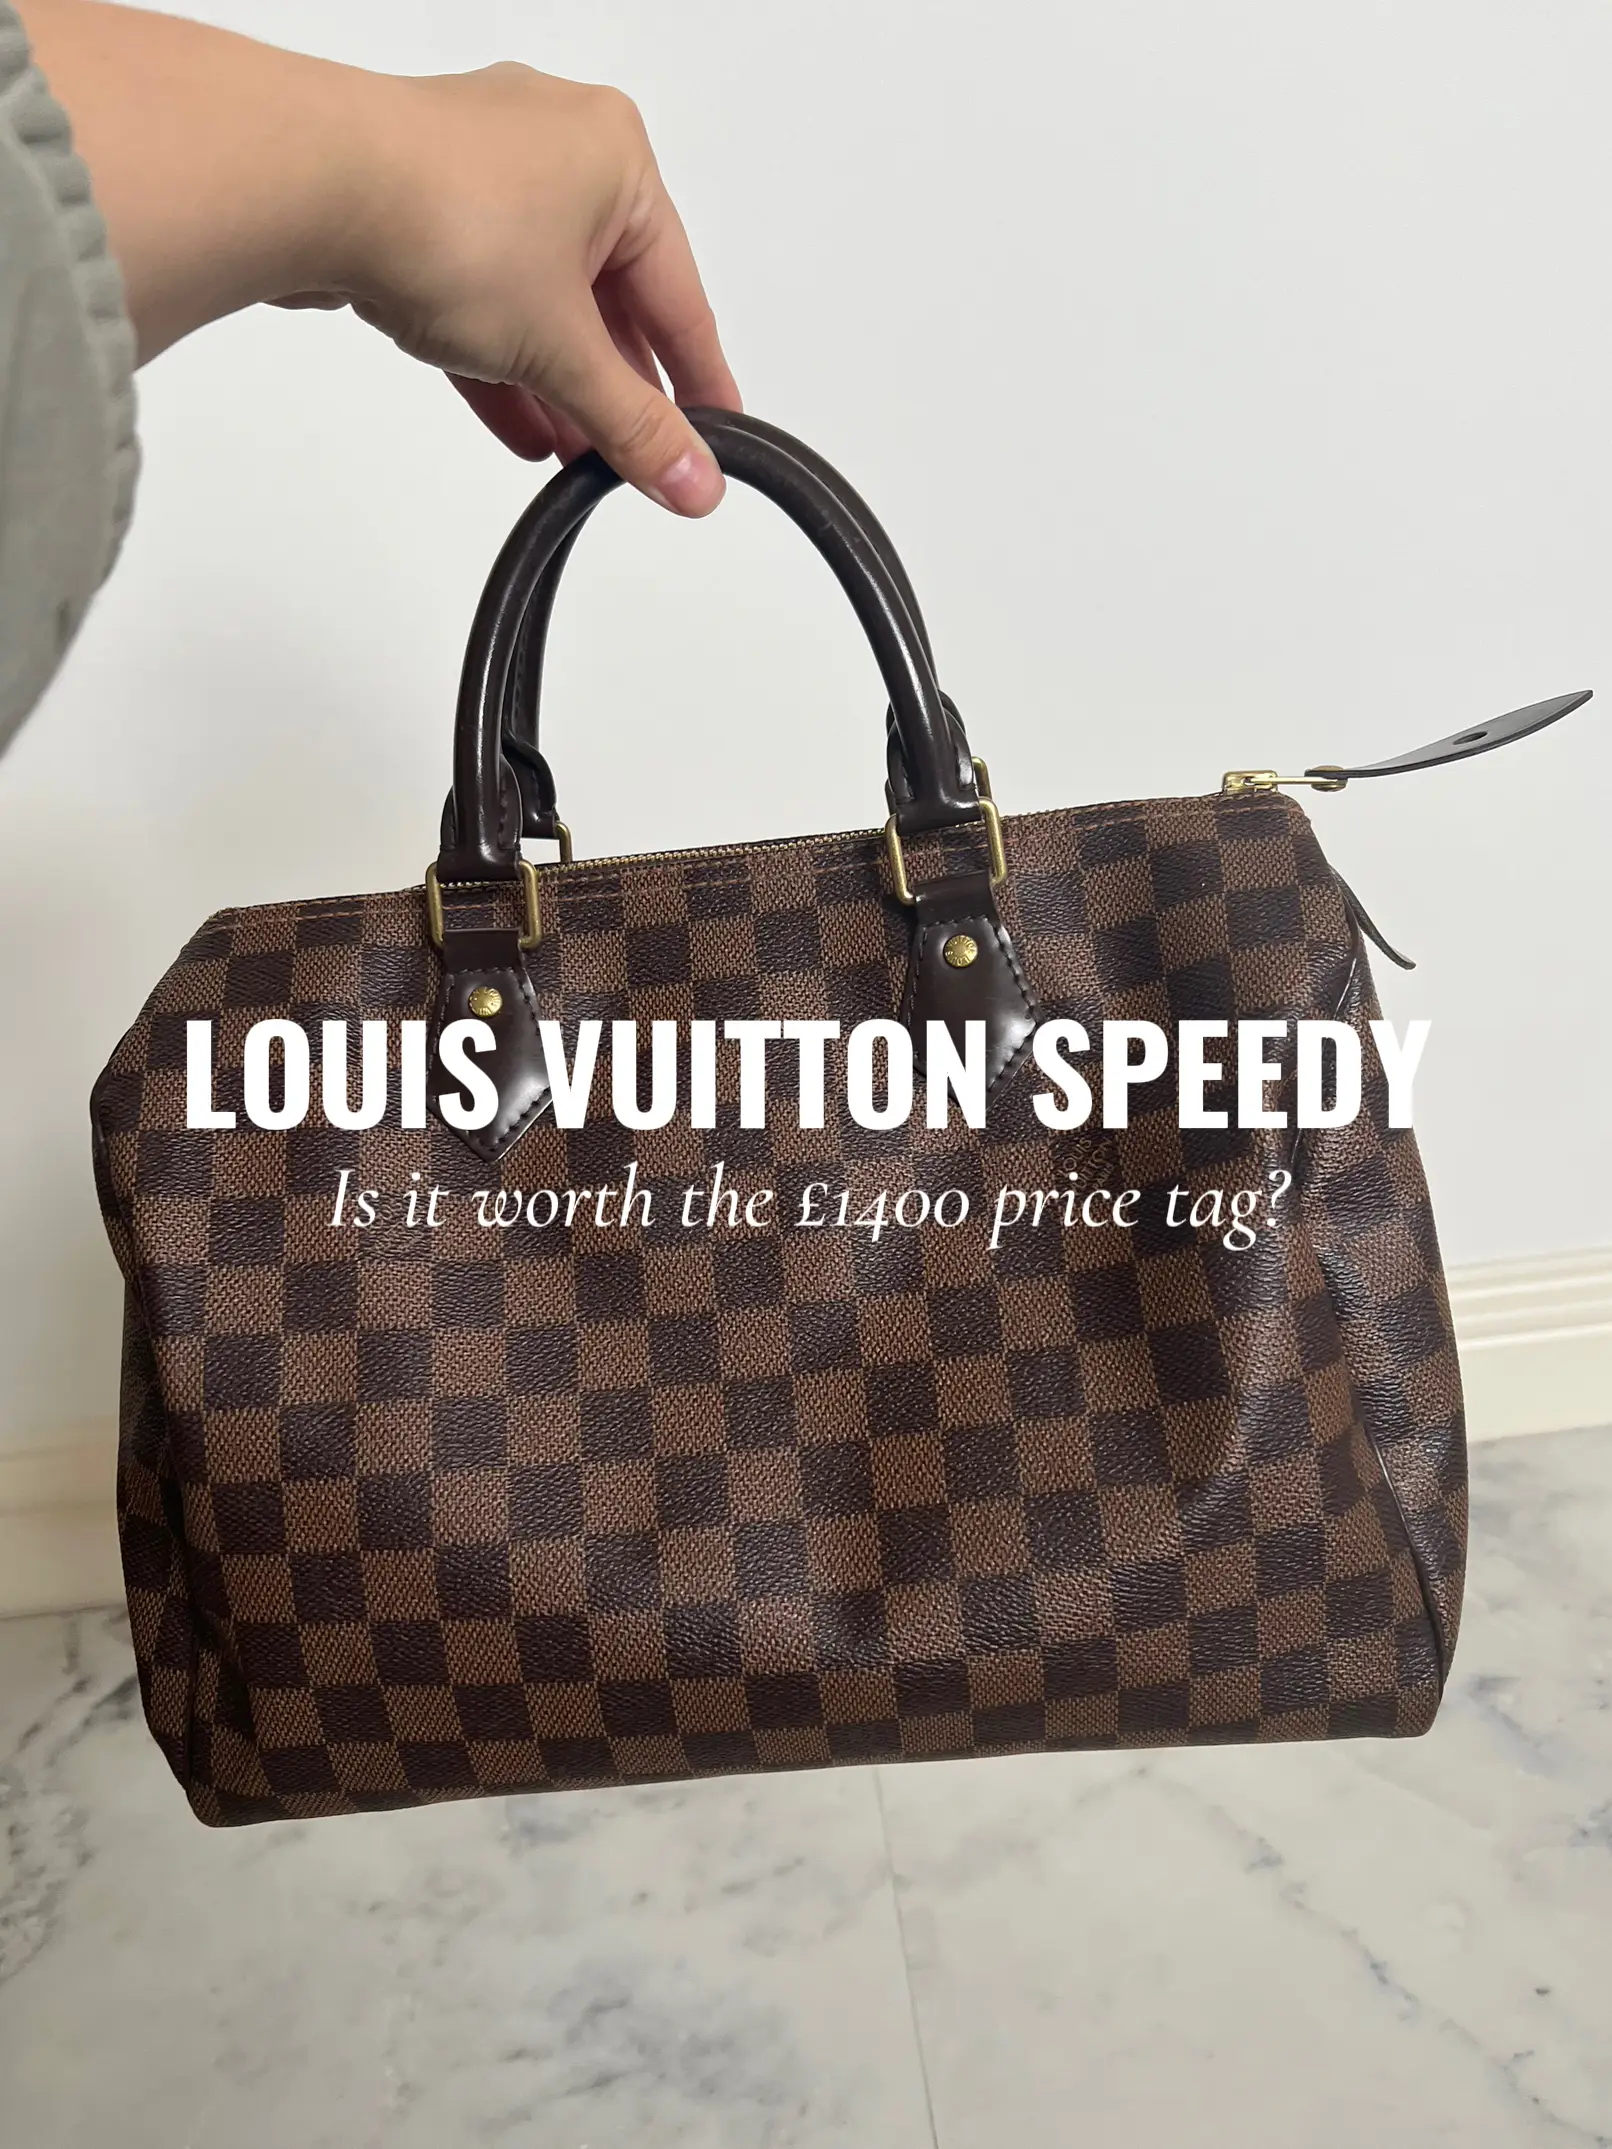 I spent a lot of money on Louis Vuitton luggage in damier, and now